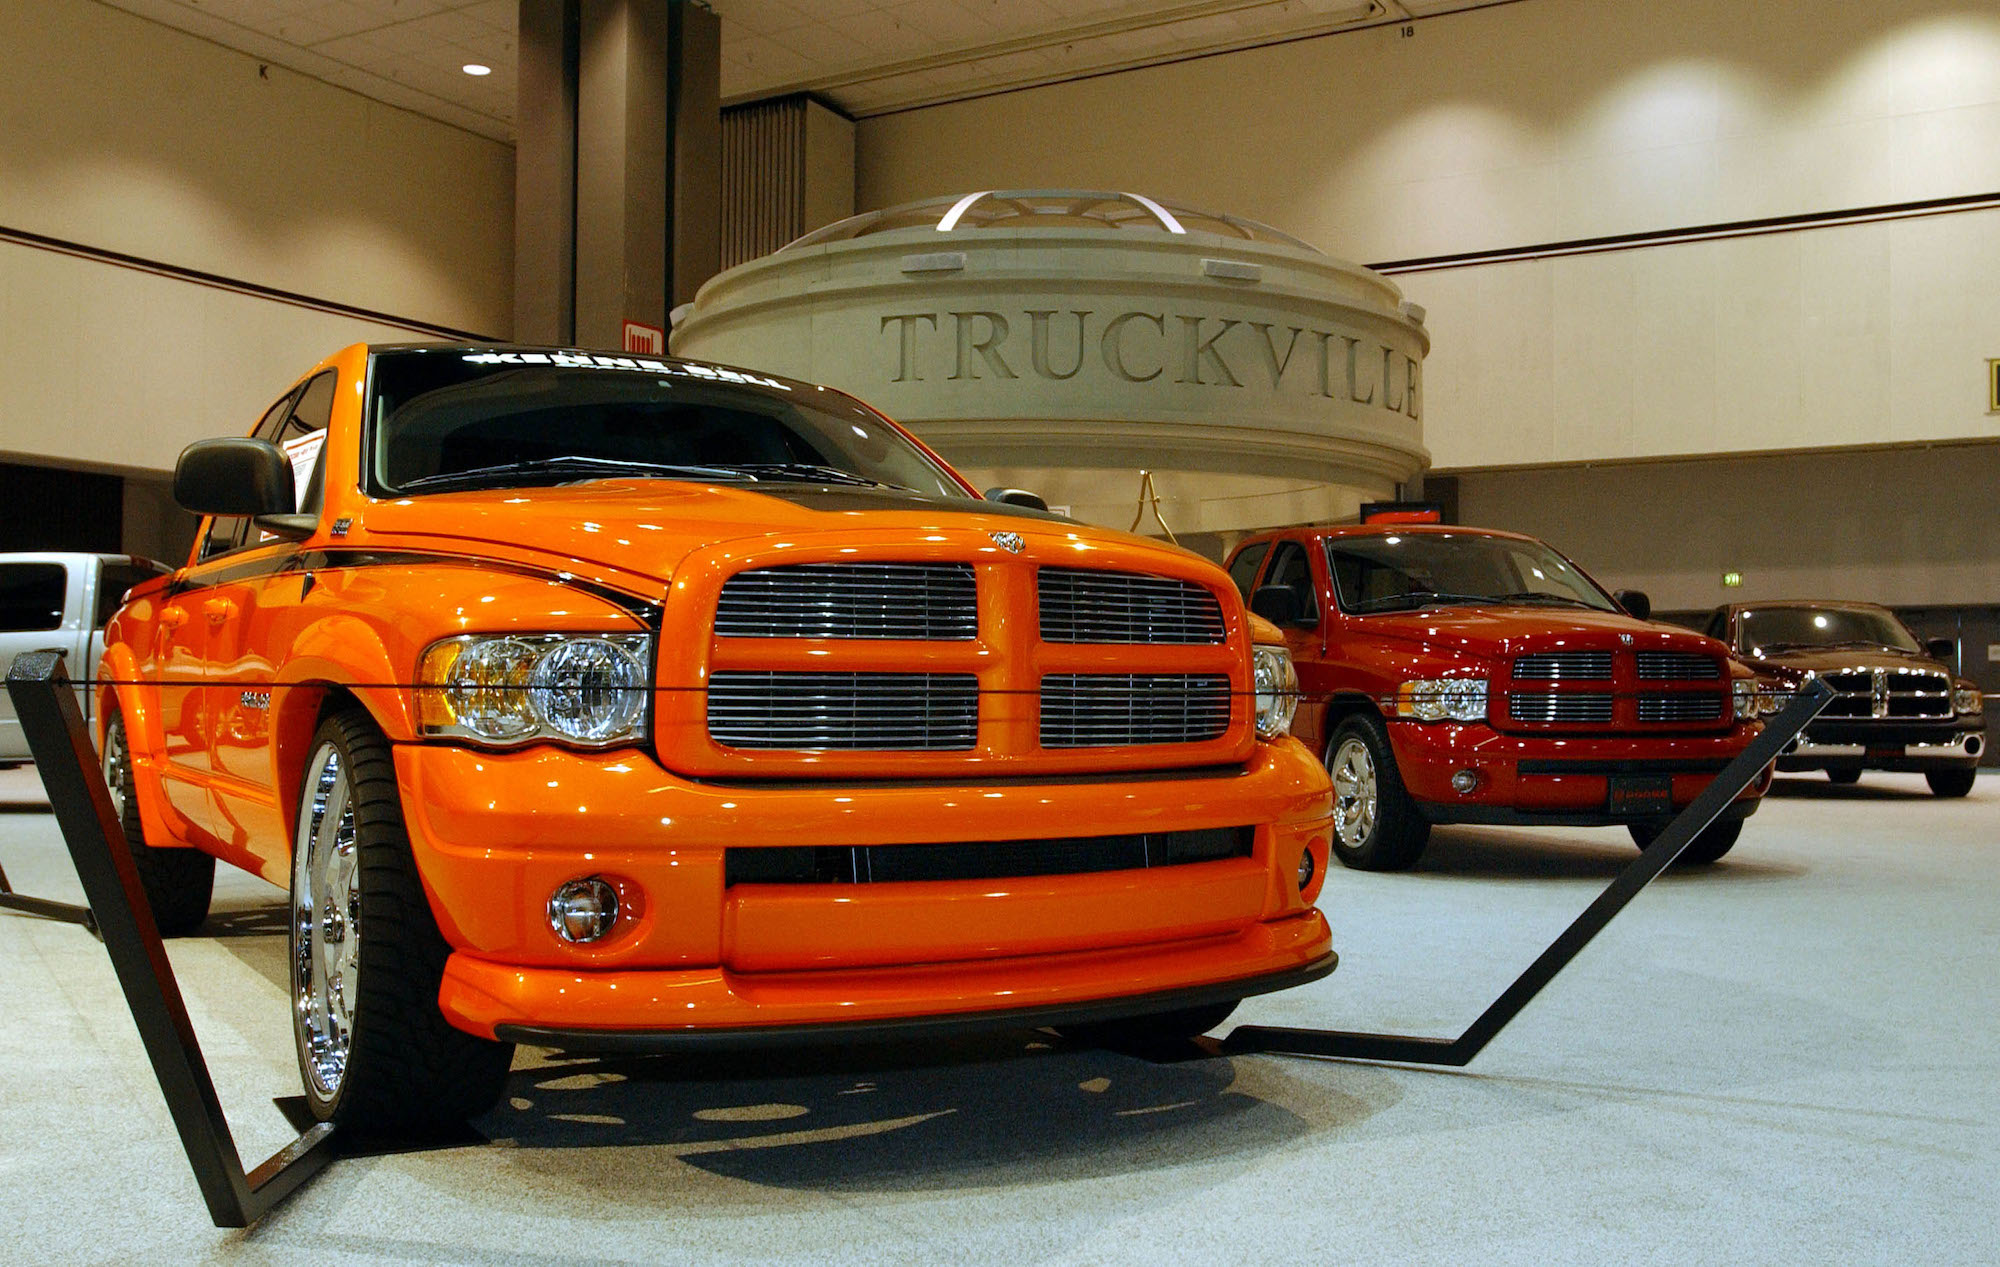 2003 Dodge Ram 2500 pickup trucks stand on display during media day at the Greater Los Angeles Auto Show on January 3, 2003, at the Los Angeles Convention Center.